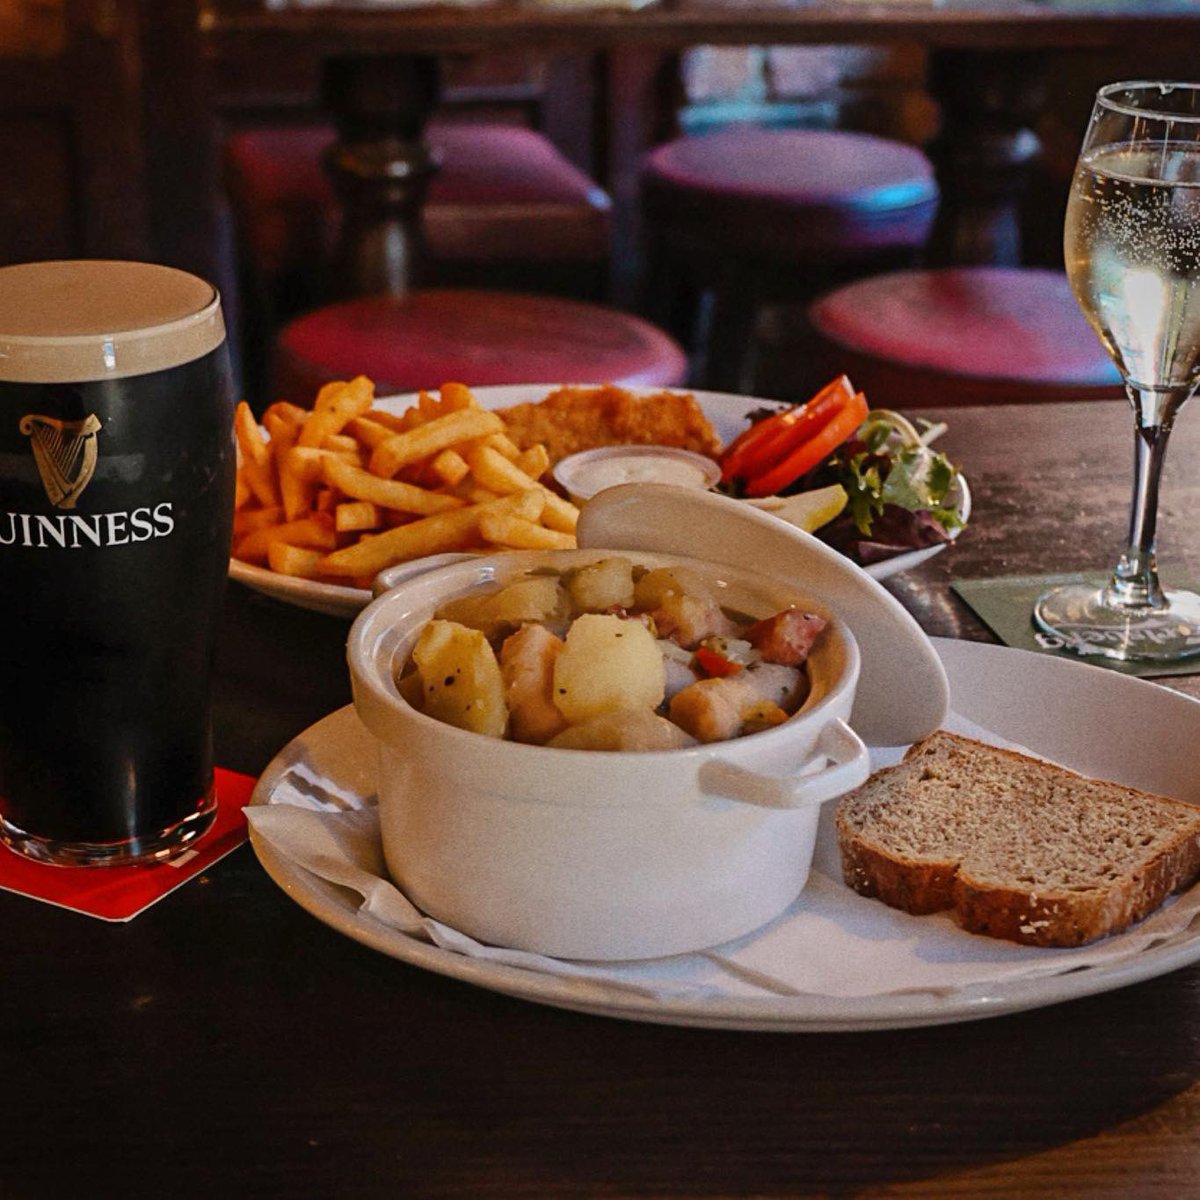 Savour your Sunday here in The Auld Dubliner with great food, drinks and live music 🍴🍻🍷🥃☘️

#theaulddubliner #theaulddublinerpub #dublin #templebar #discovertemplebar #dublinpubs #sunday #food #drinks #livemusic #sundaysession